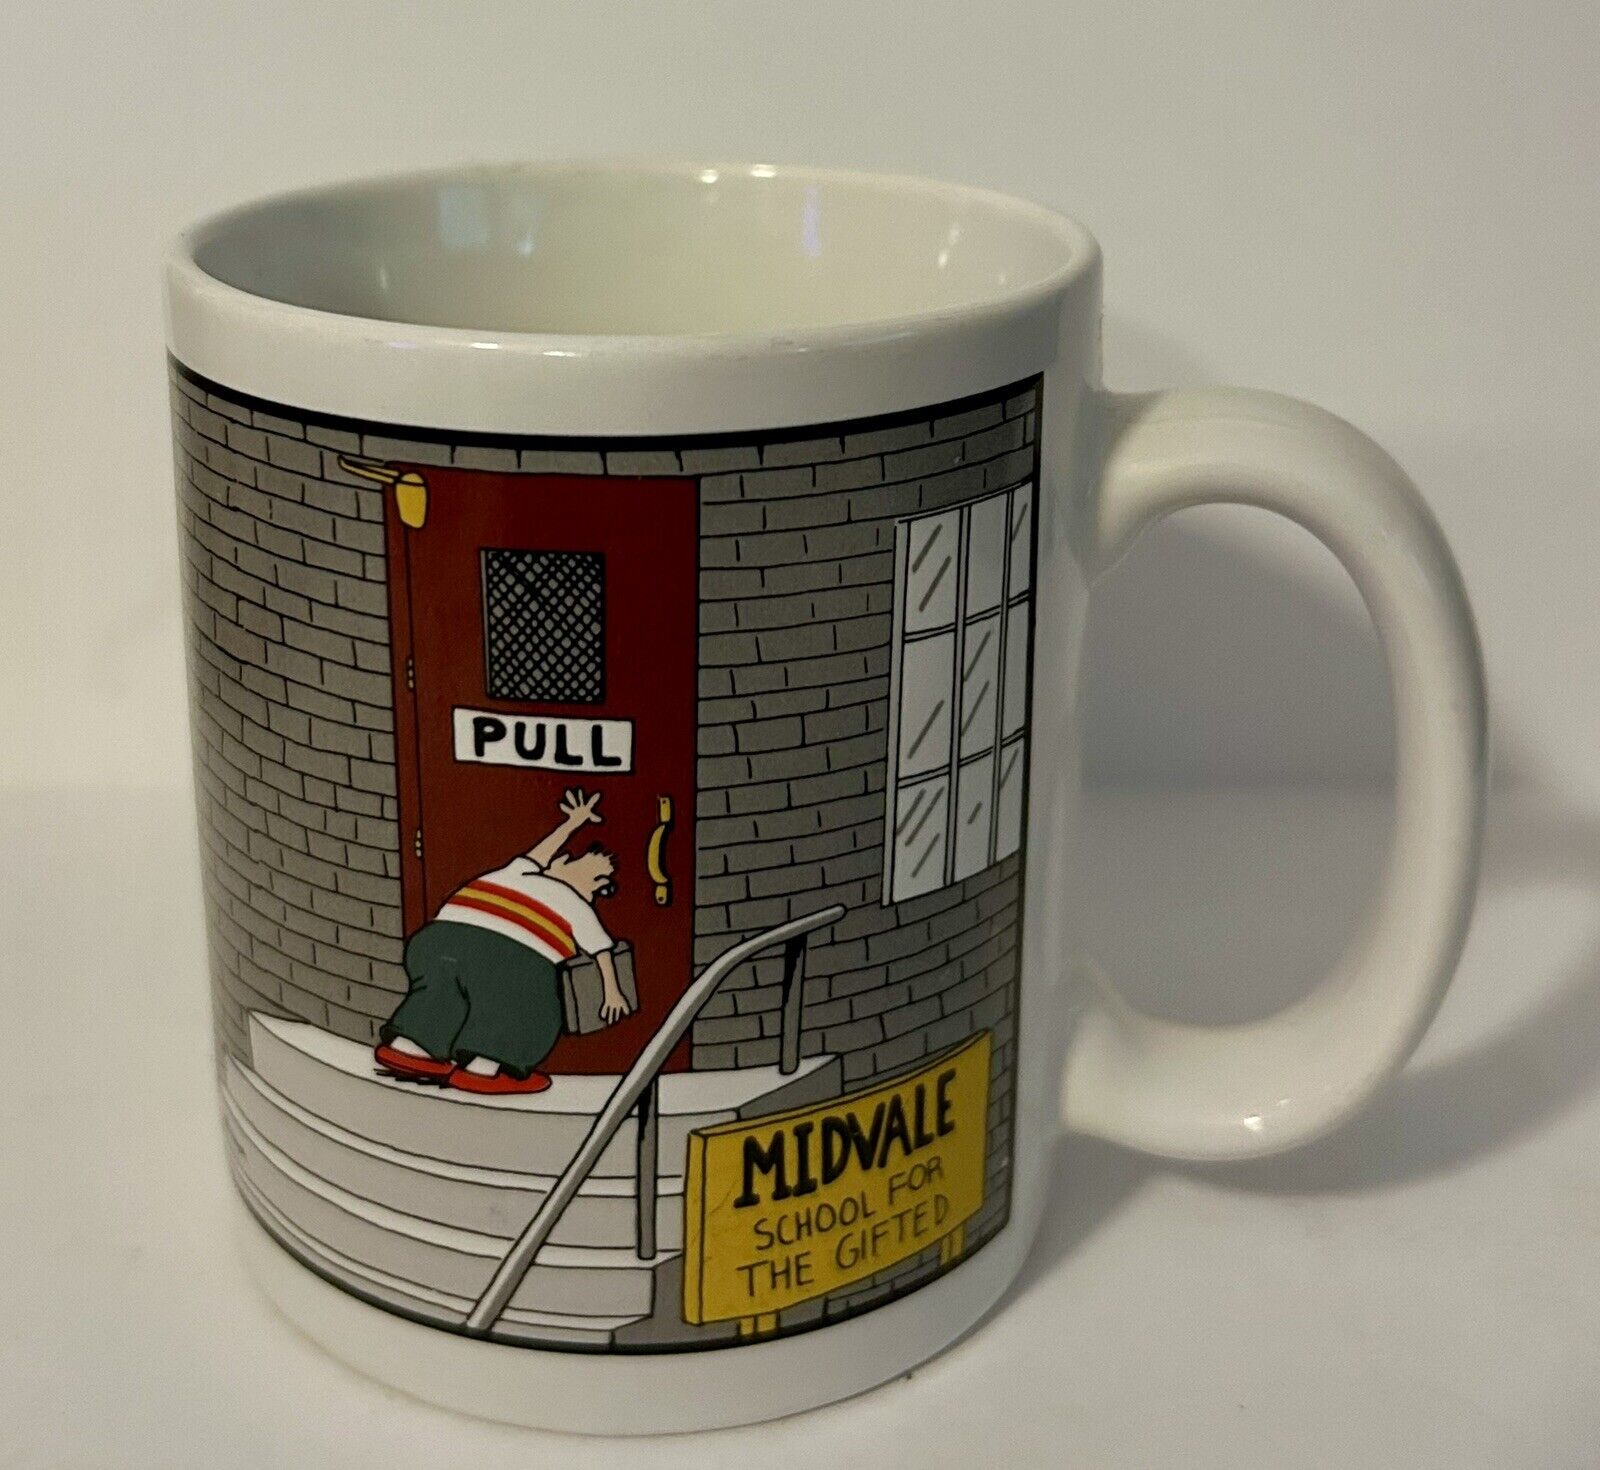 The Far Side Gary Larson Coffee Cup Mug “Midvale School For The Gifted” VTG 1986